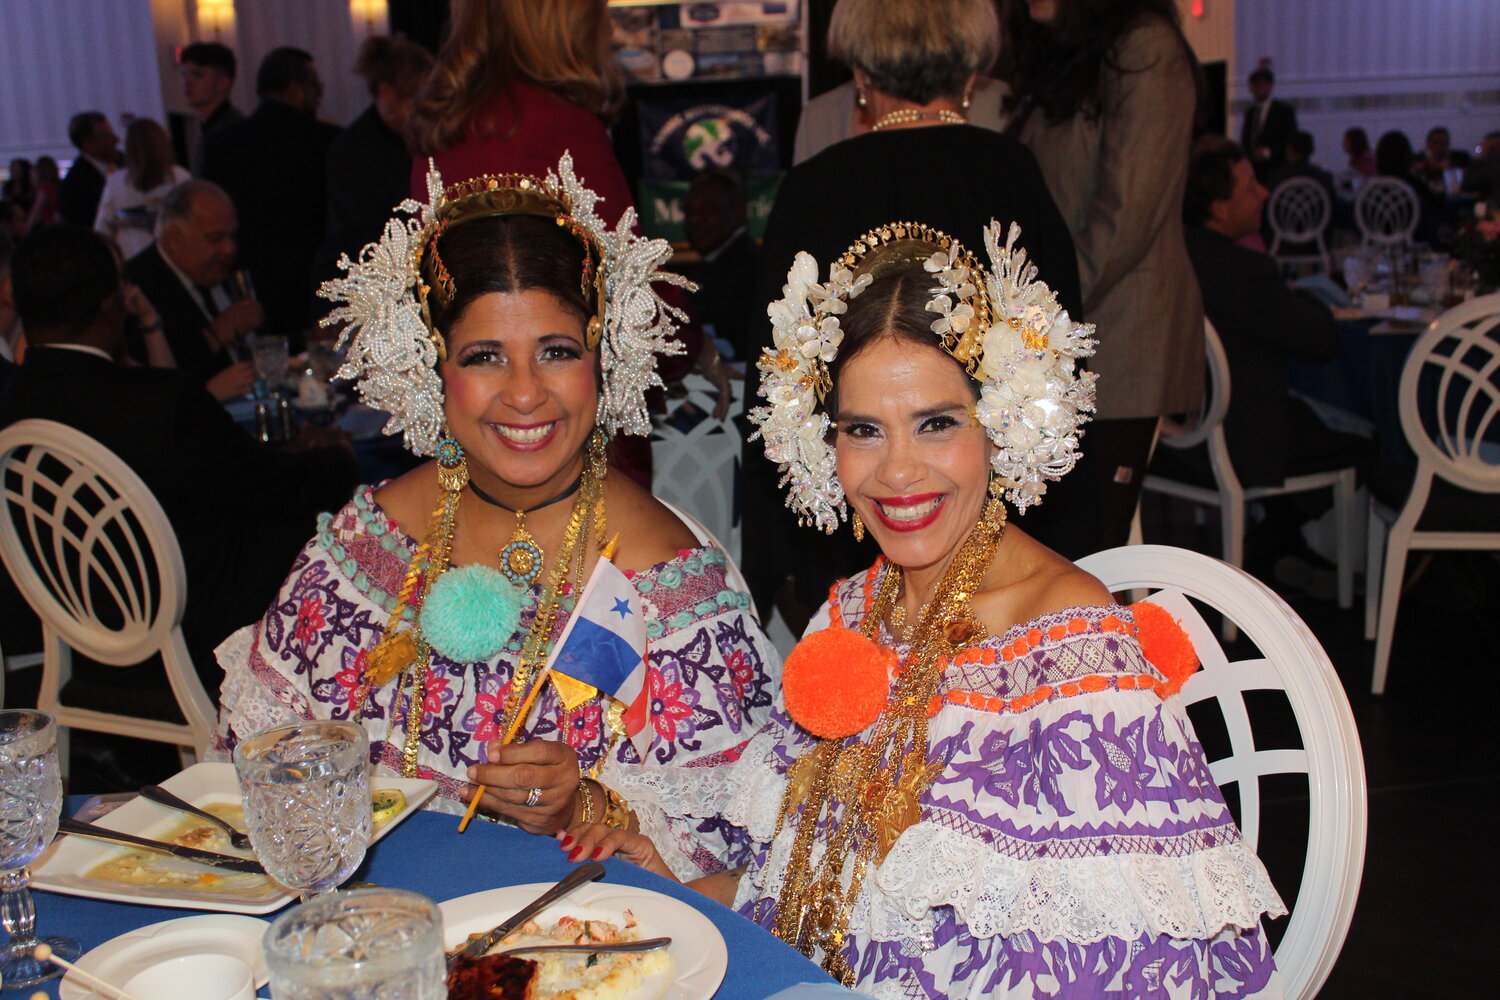 The Doma Panema dance group started the Hispanic Brotherhood Annual Scholarship Dinner off with a Panamanian traditional dance routine, and its members later enjoyed some dinner while scholarships and citations were handed out.